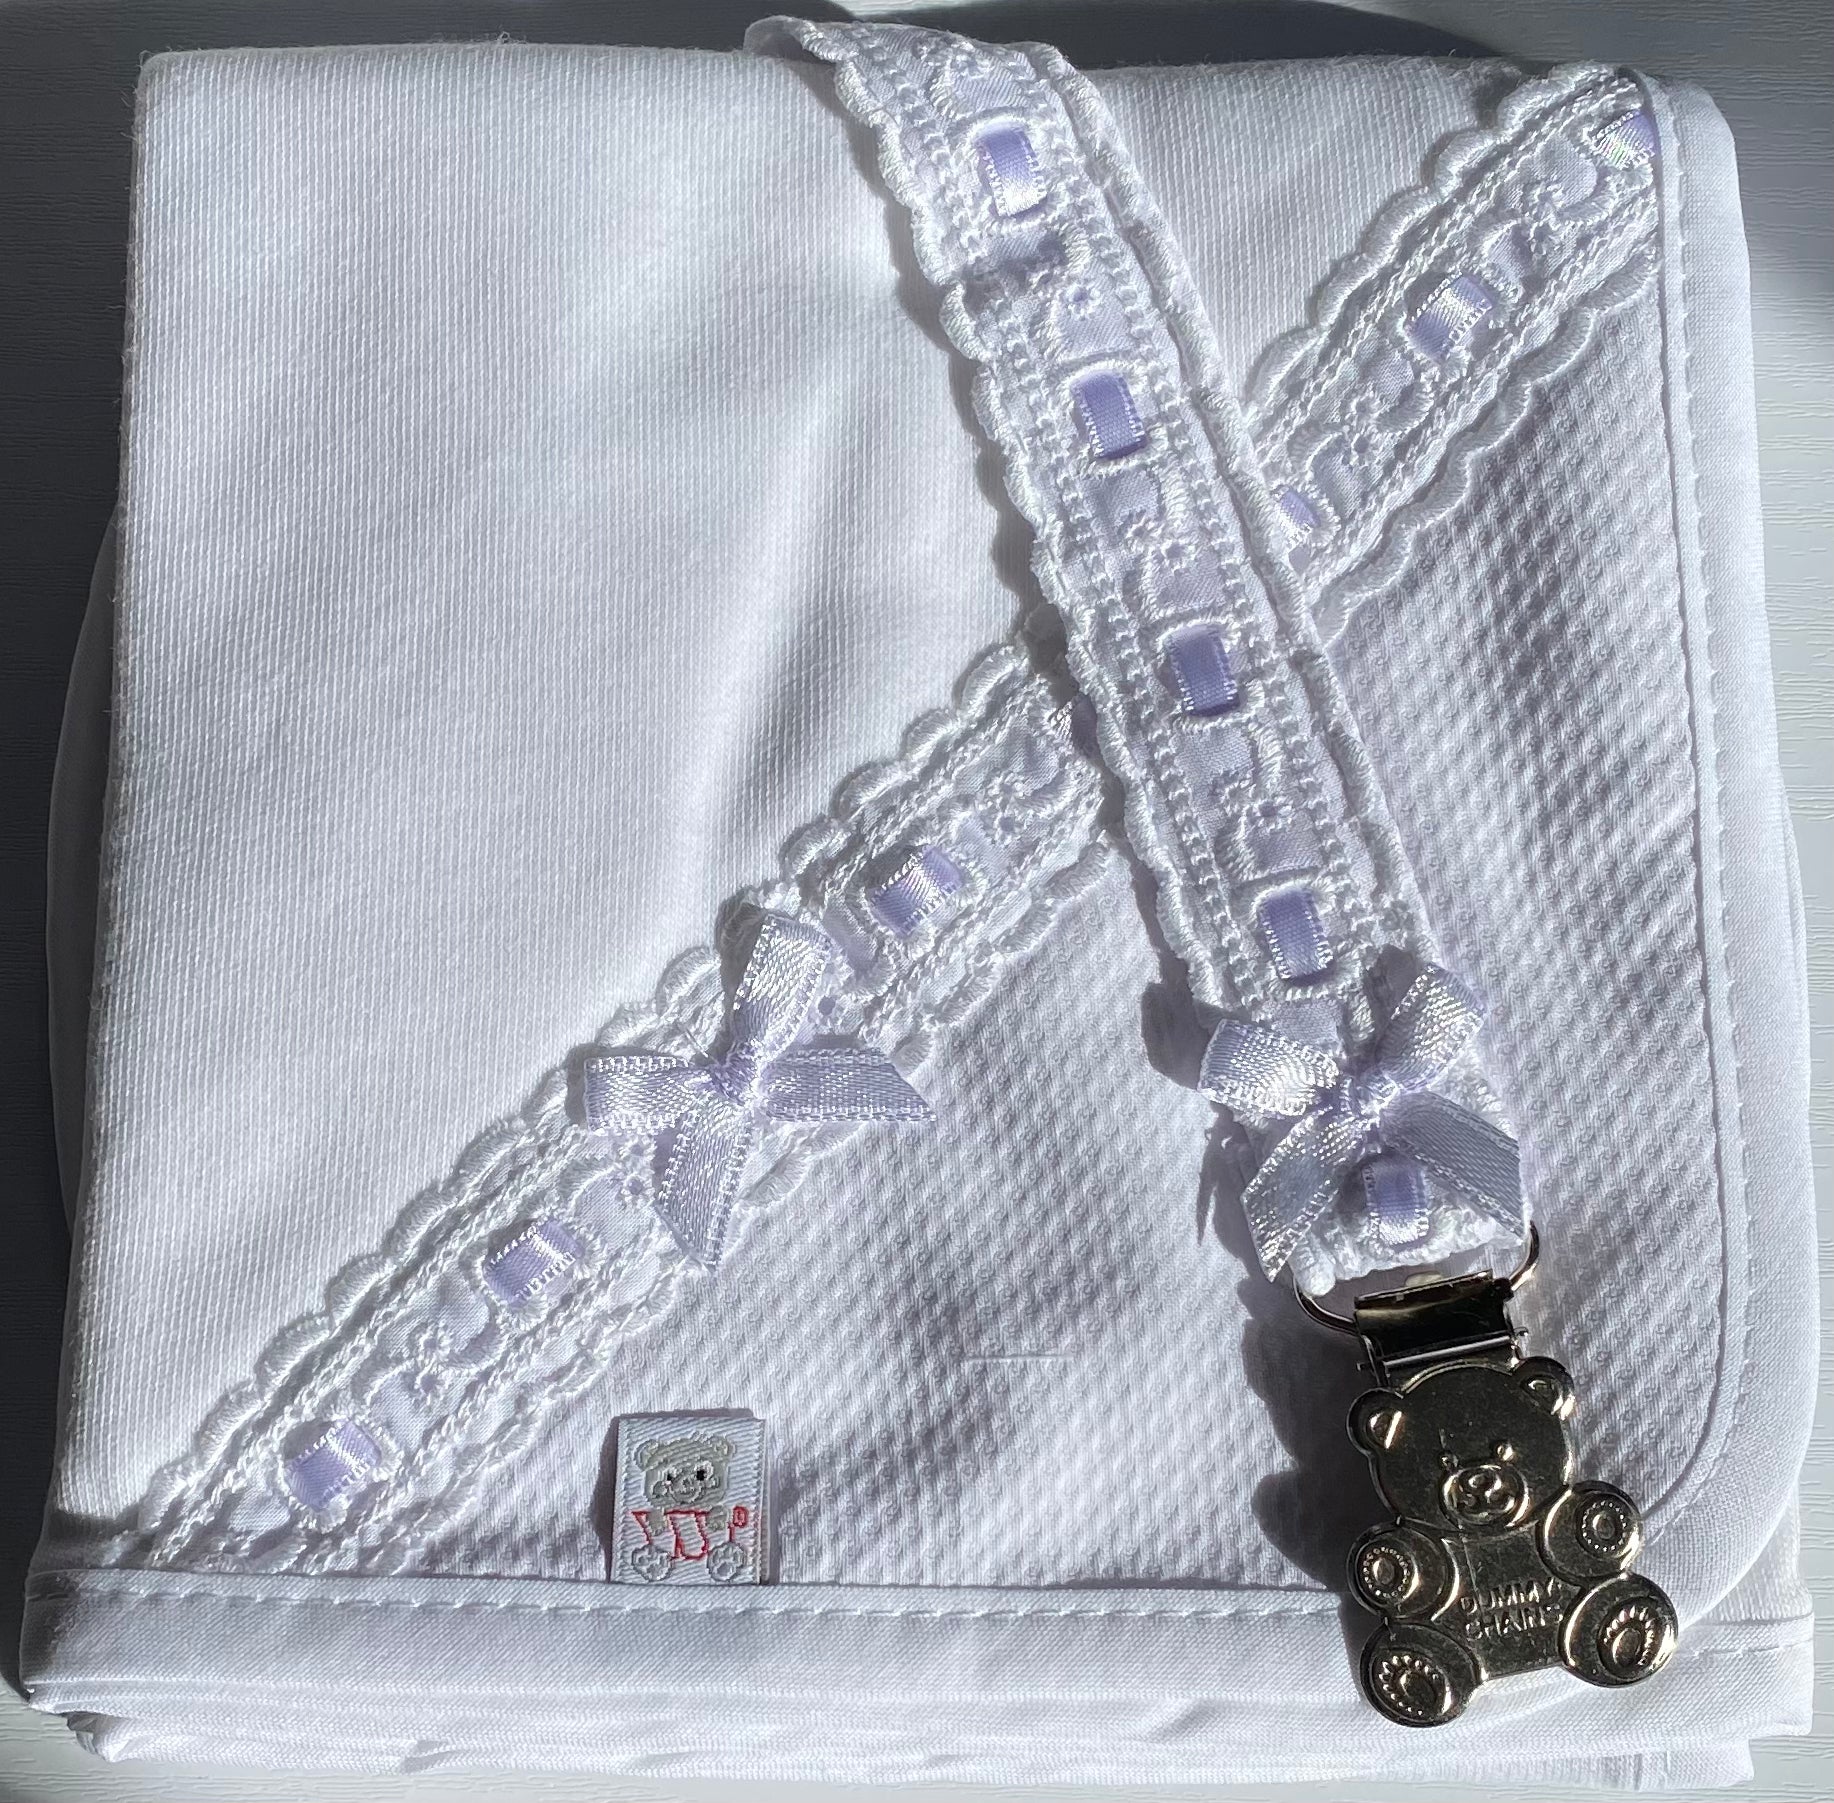 Baby gift sets - muslin cotton bib and dummy clip sets